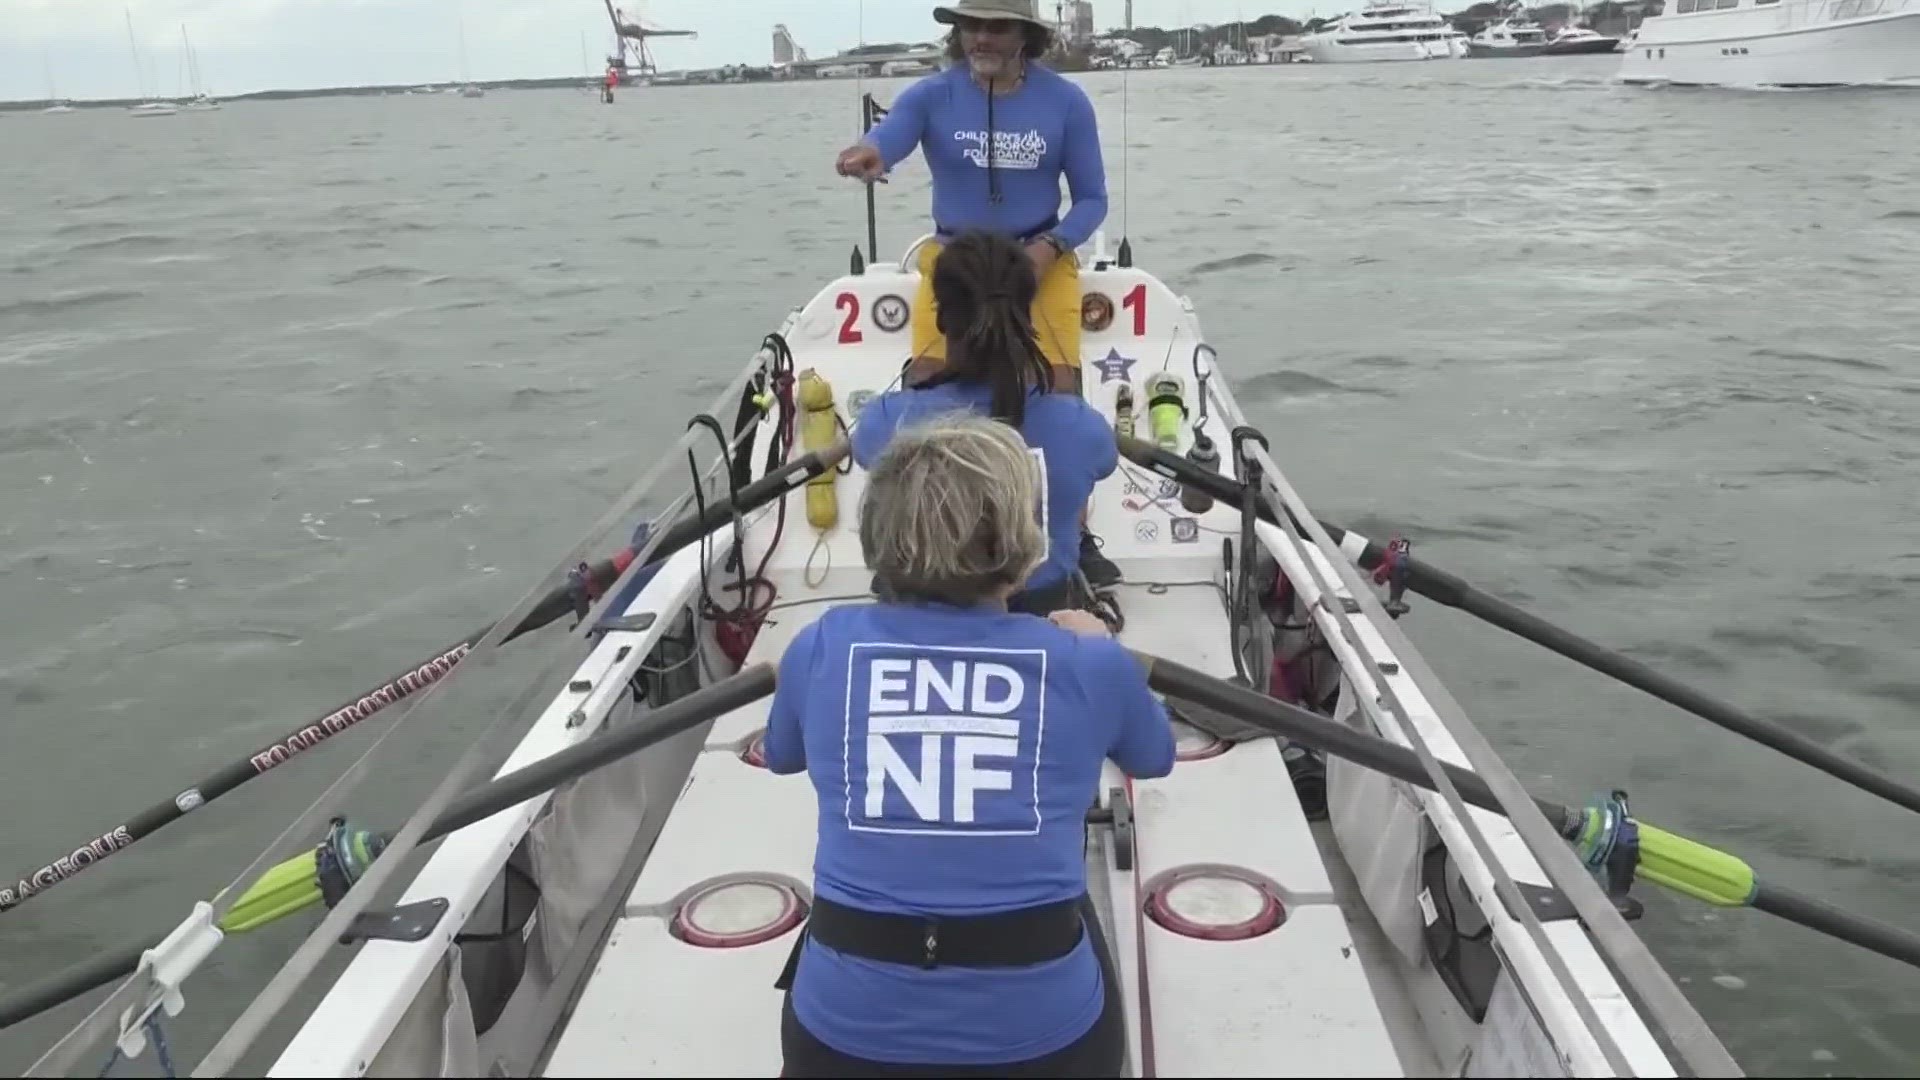 A Nassau County woman will row from Miami to Fernandina Beach to raise money for people battling neurofibromatosis.